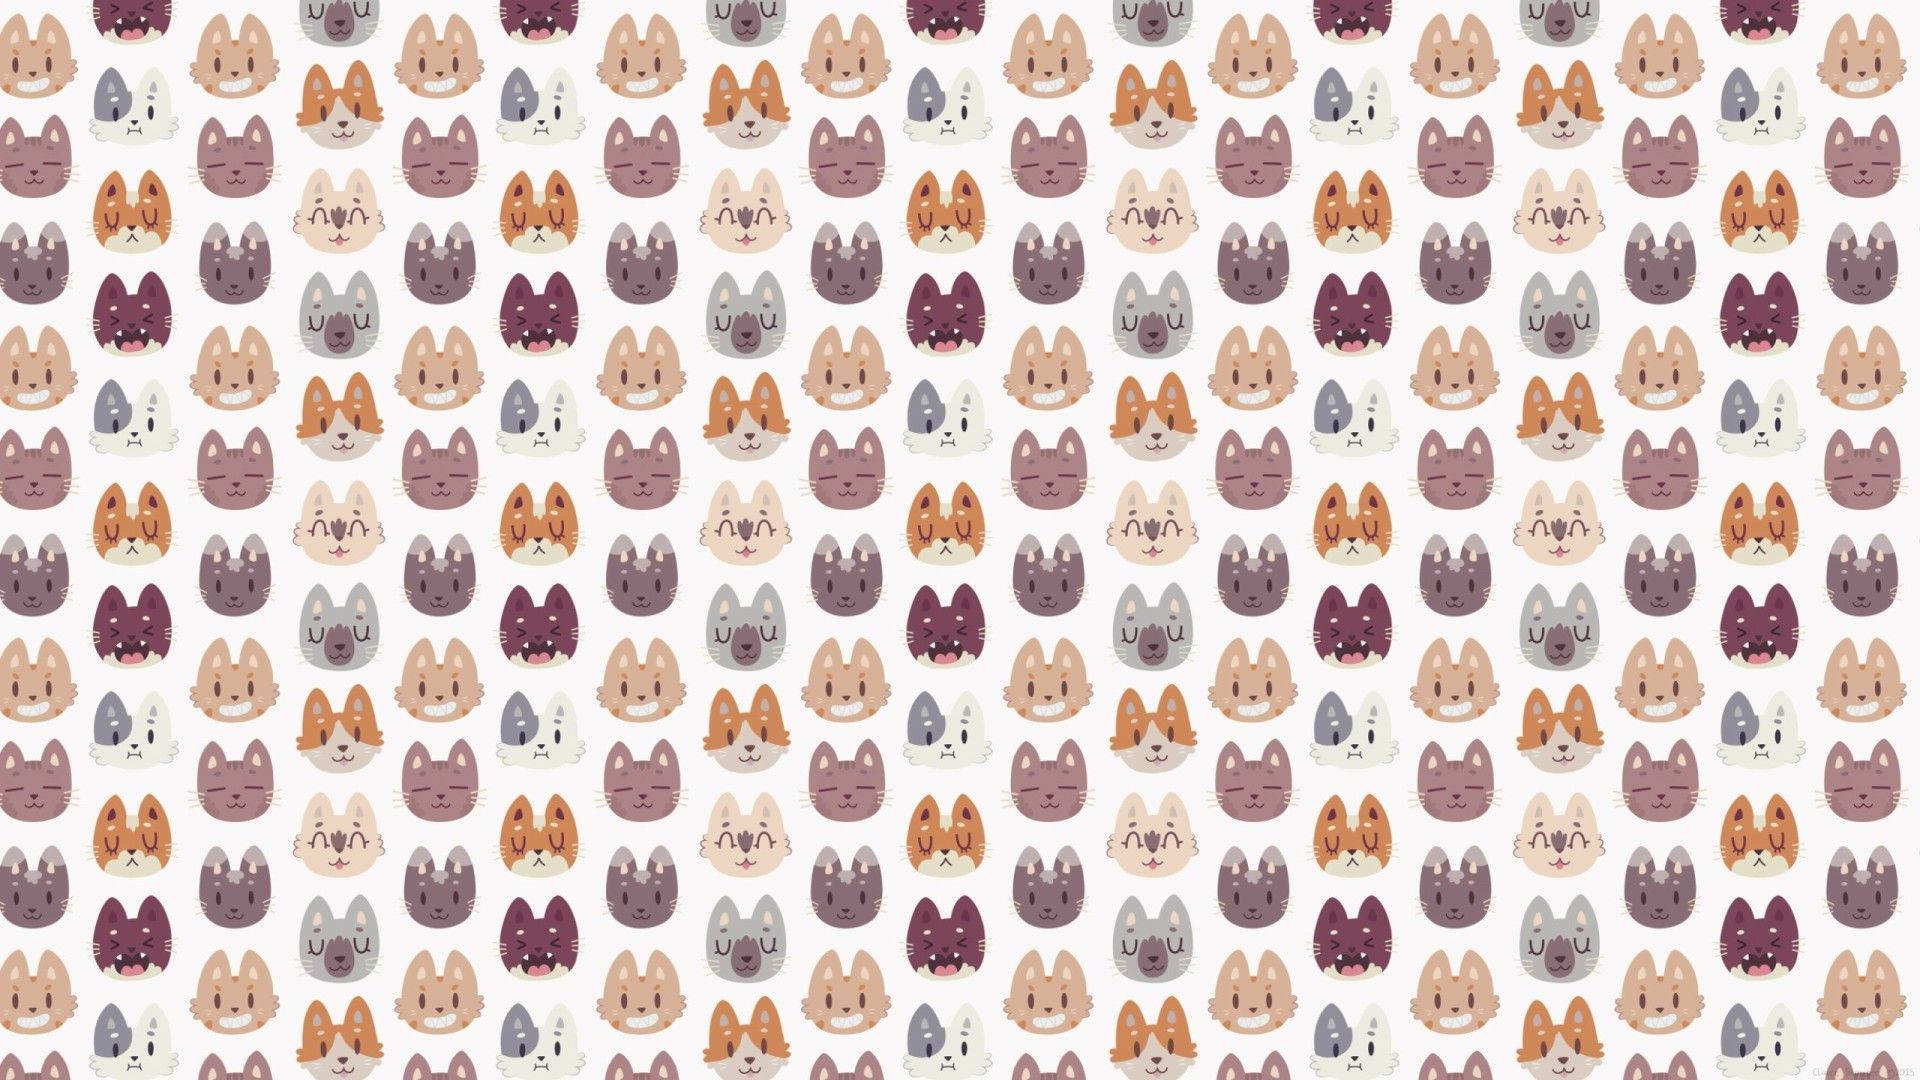 Foxes And Cats Tumblr Aesthetic Wallpaper